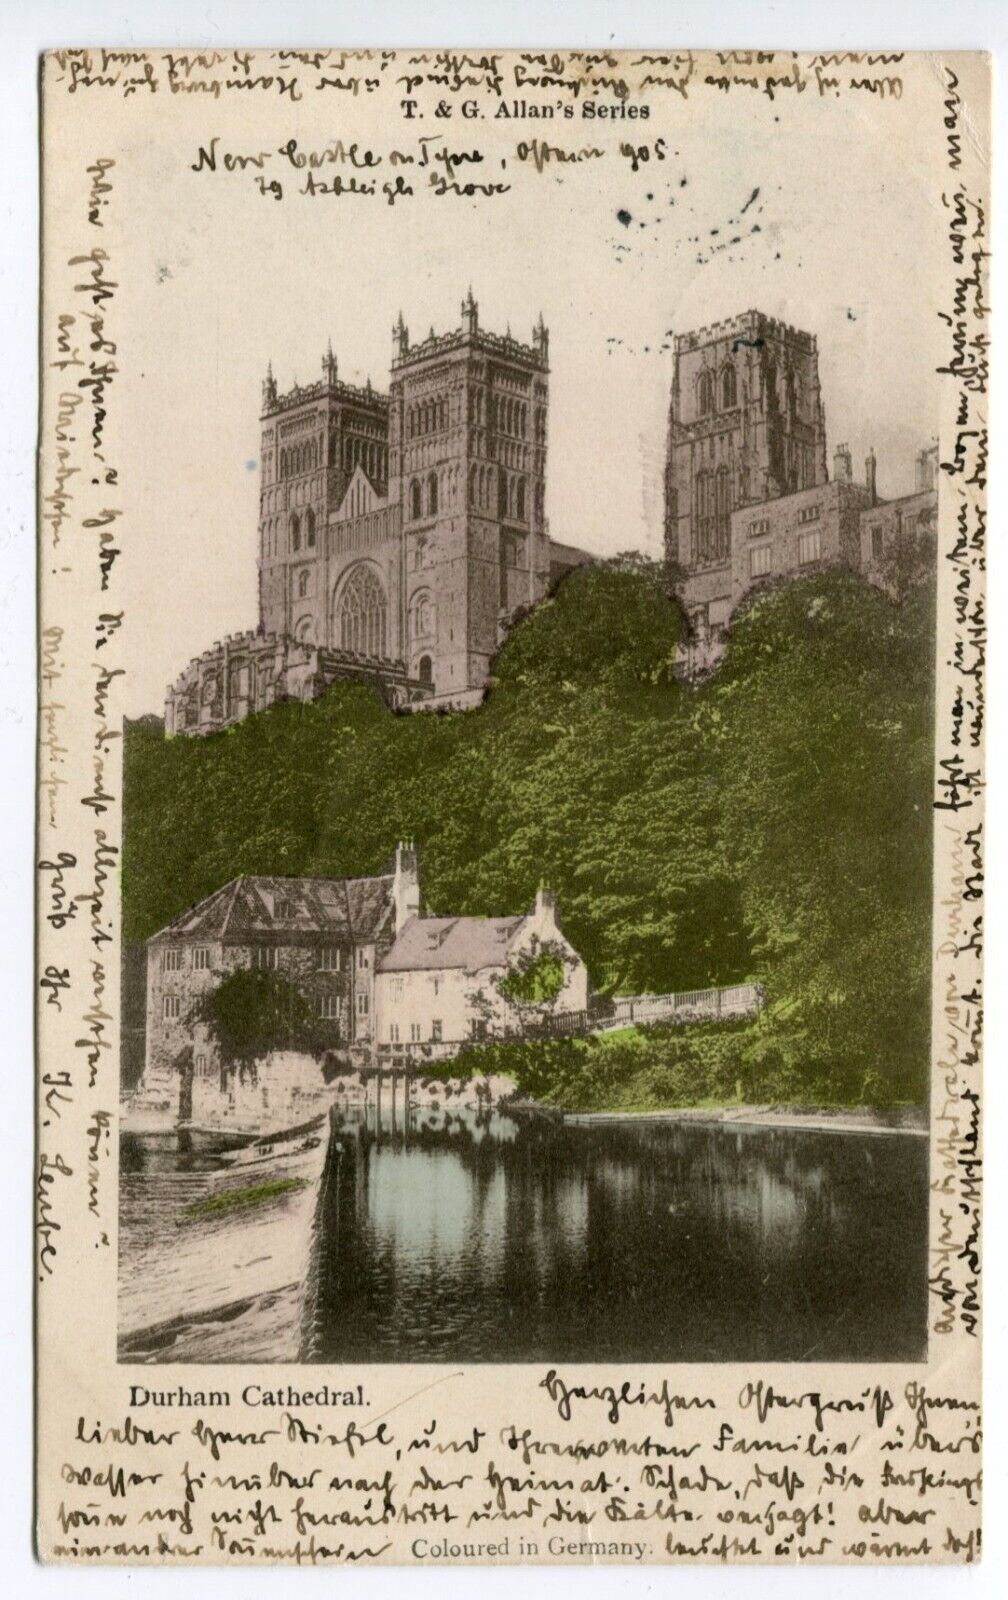 House Clearance - Durham Cathedral 1905 # Allan's Series #